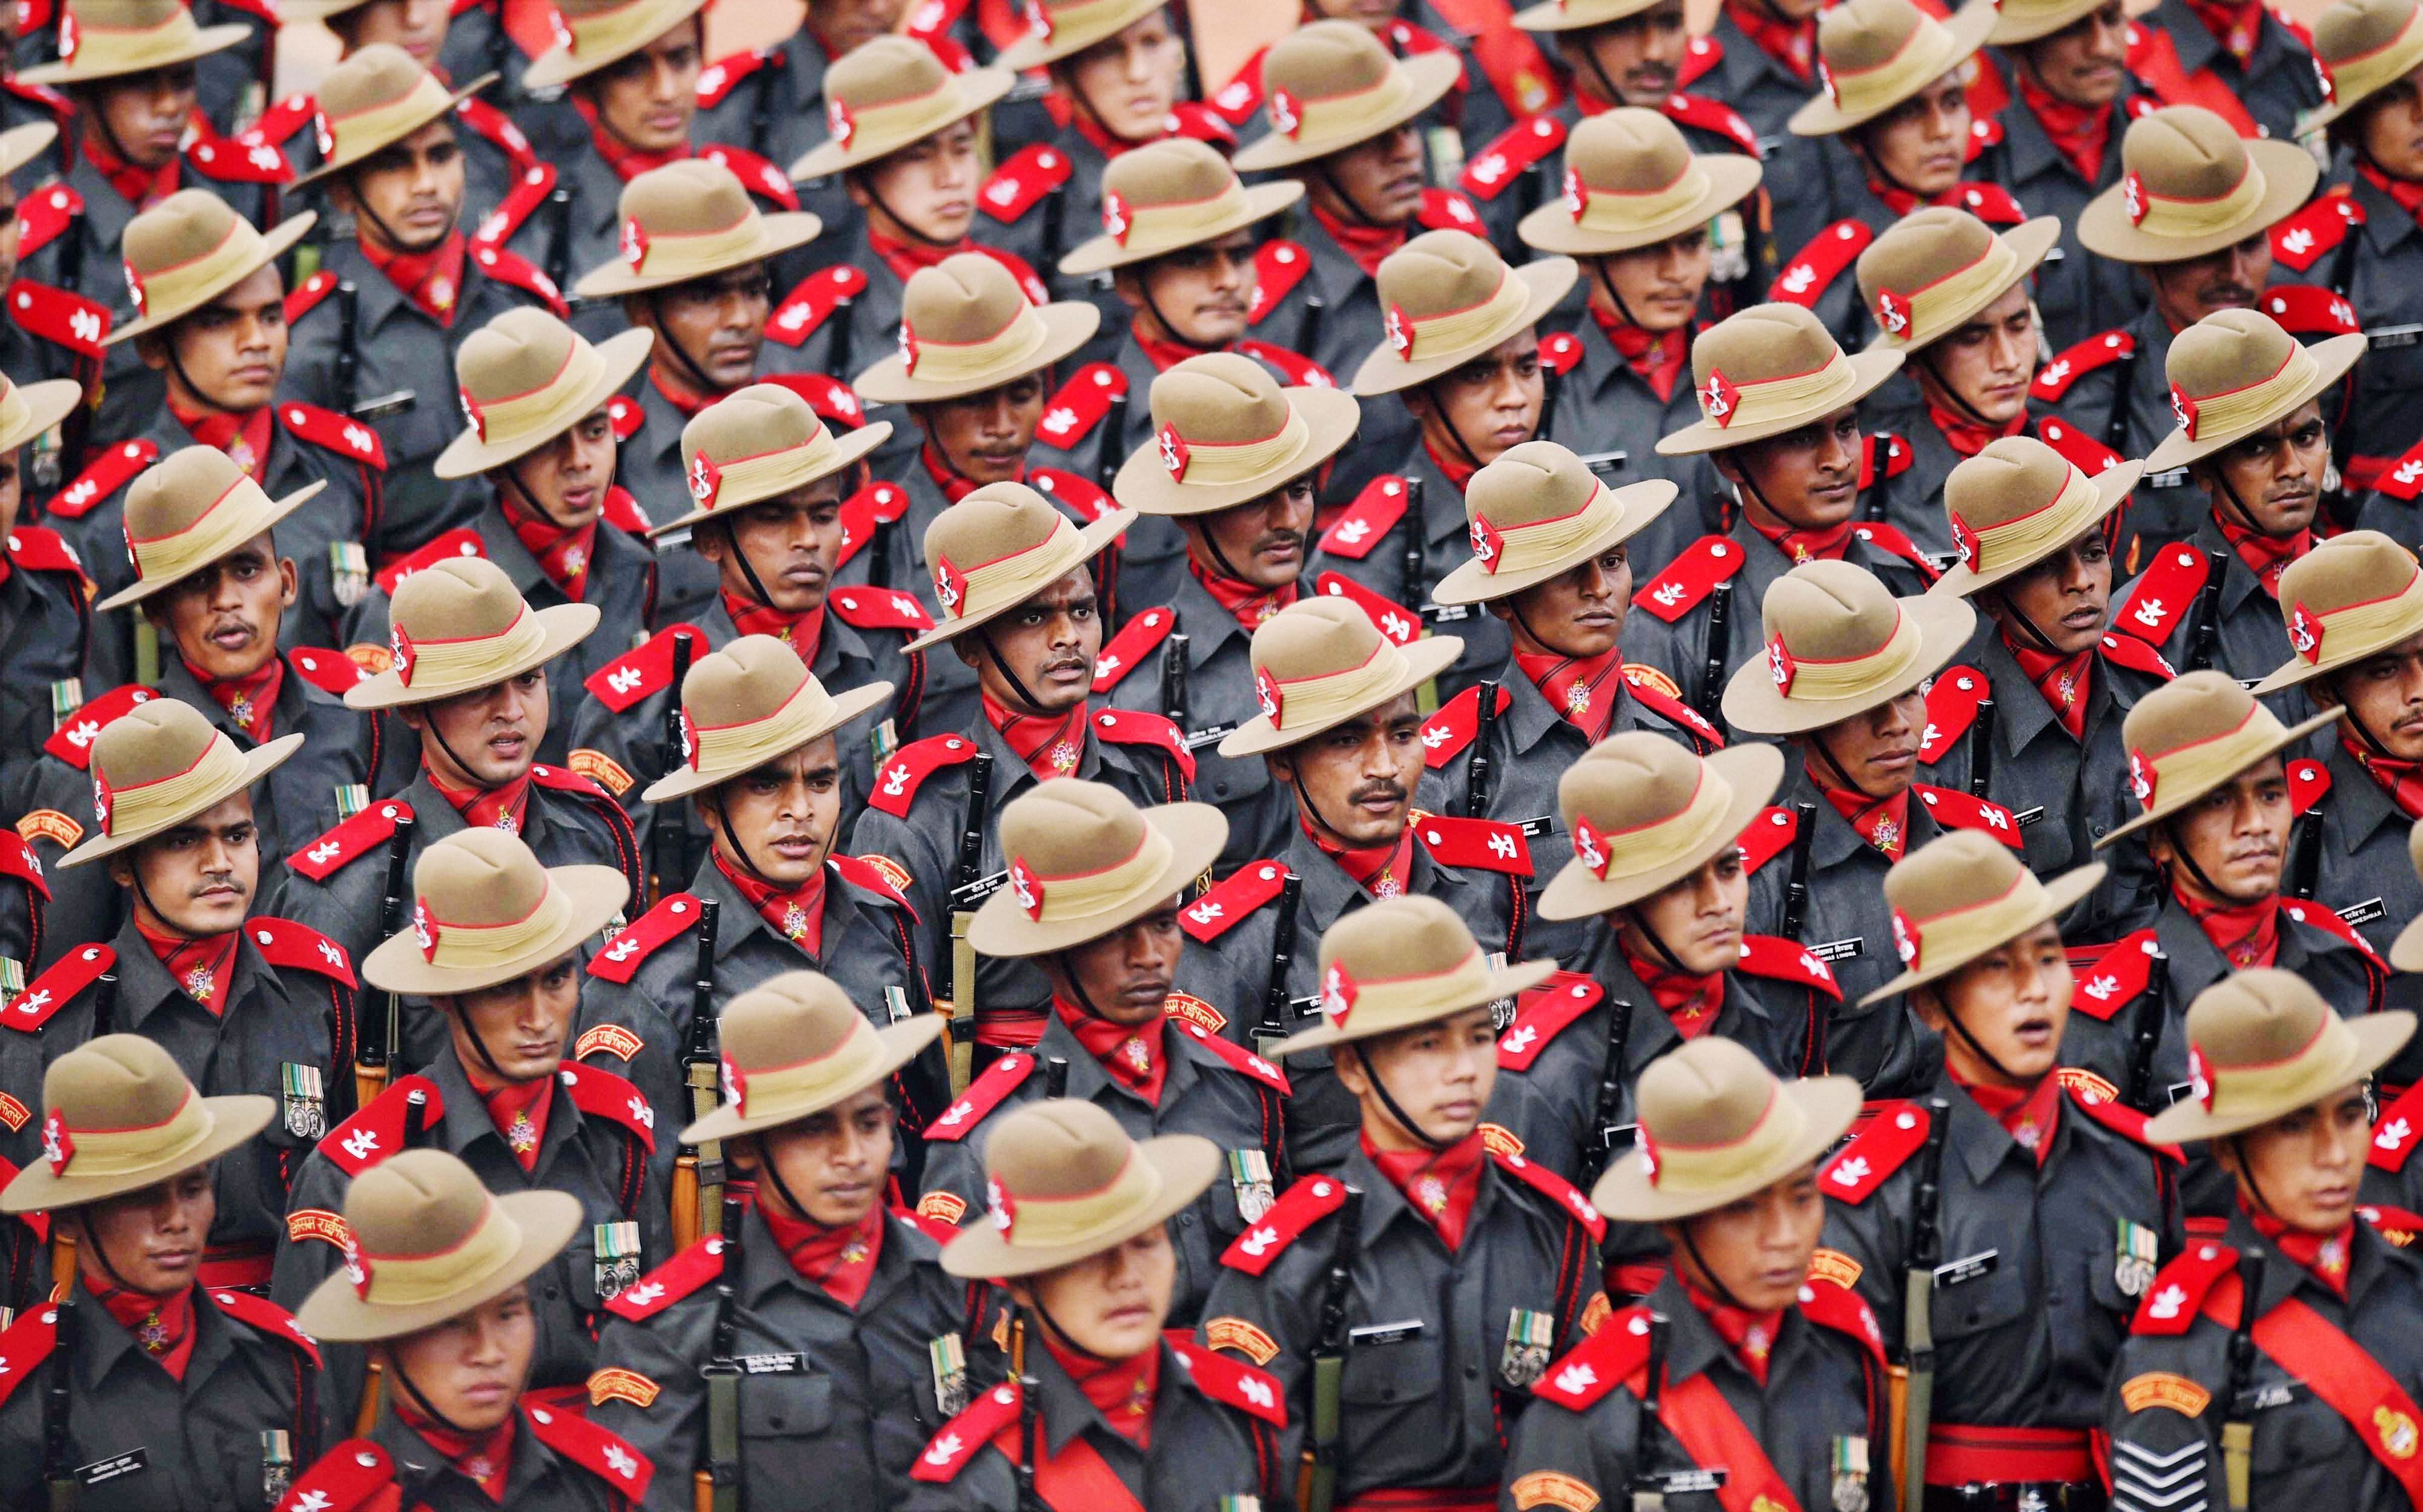 Paramilitary soldiers march during the full dress rehearsal for